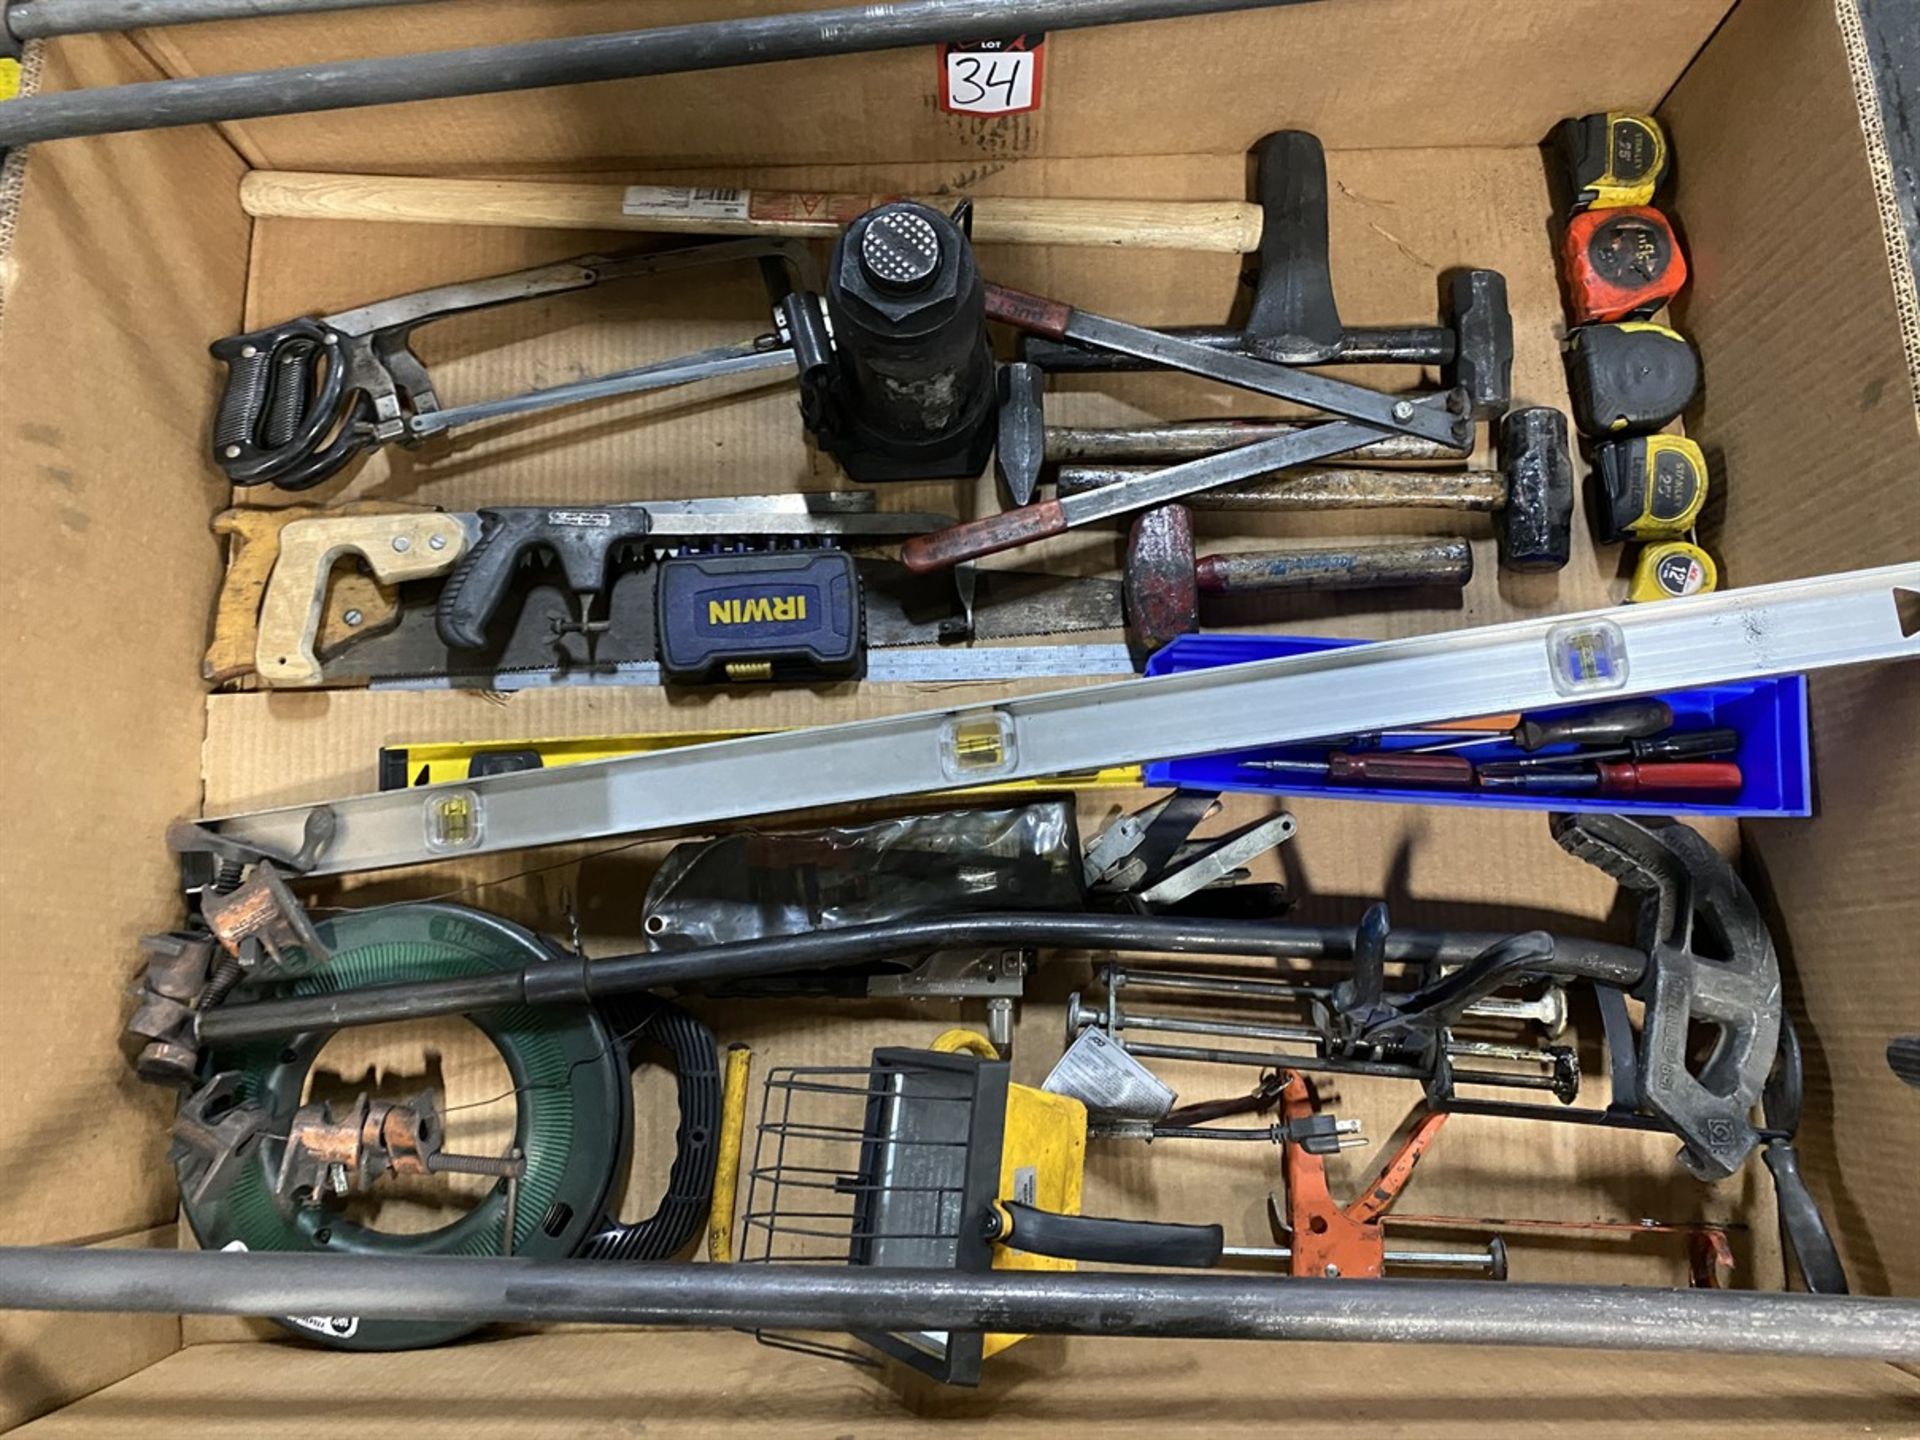 Lot of Assorted Tools Including Hand Riveters, Levels, Fish Tape, Saws, and Tape Measures - Image 4 of 4